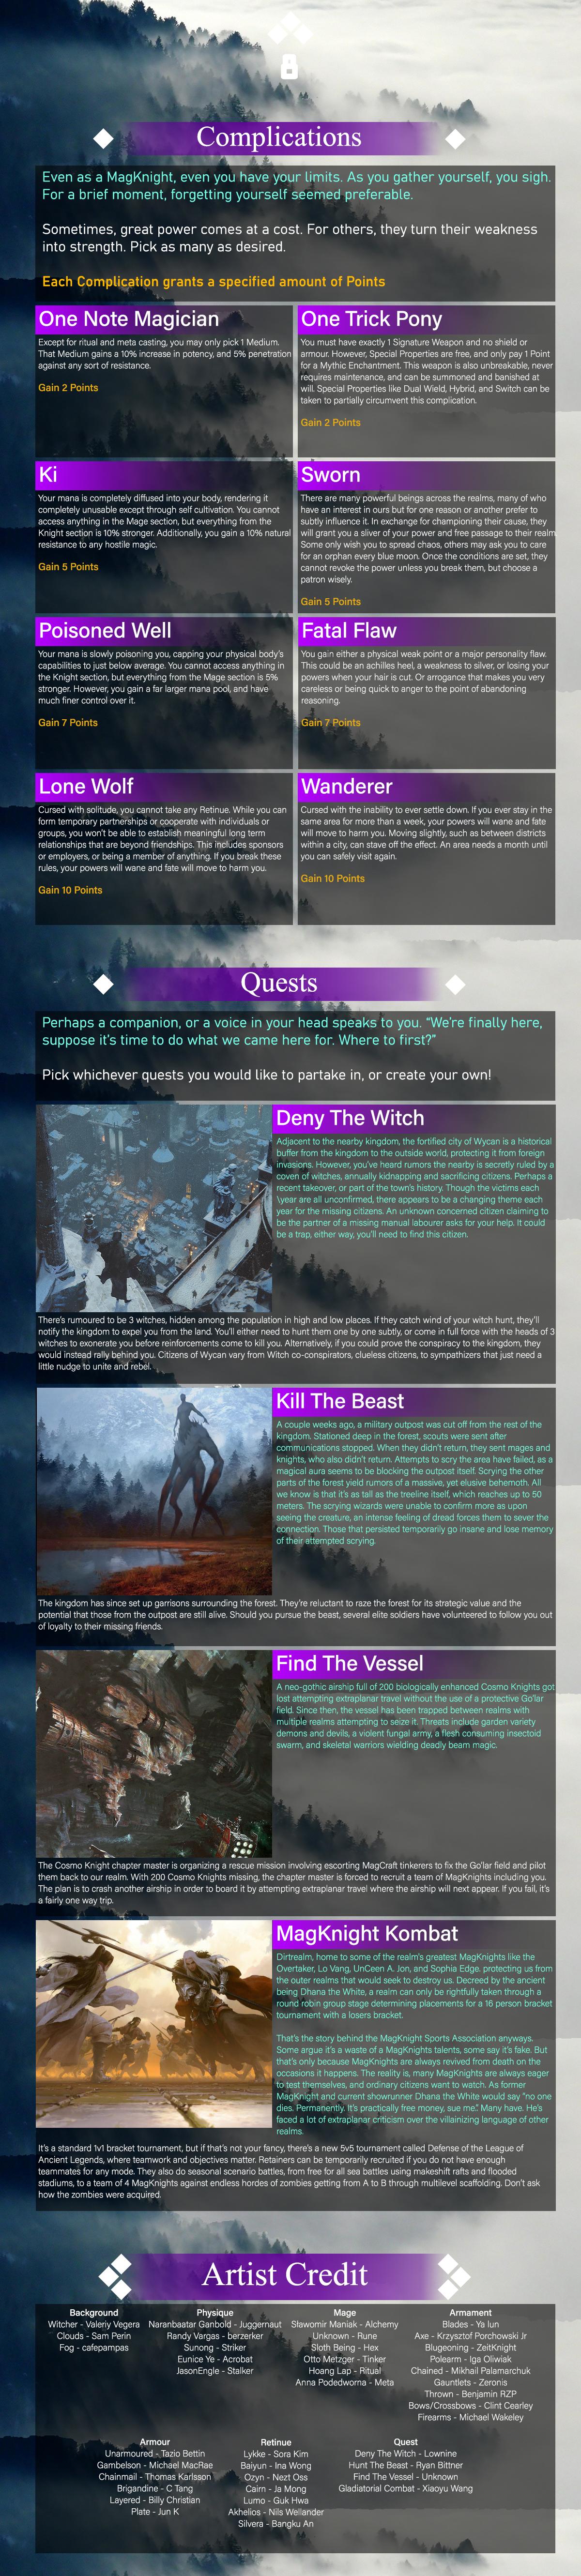 Image For Post | Original source: https://www.reddit.com/r/makeyourchoice/comments/mwk5p8/magknight_cyoa_v21_hotfix/